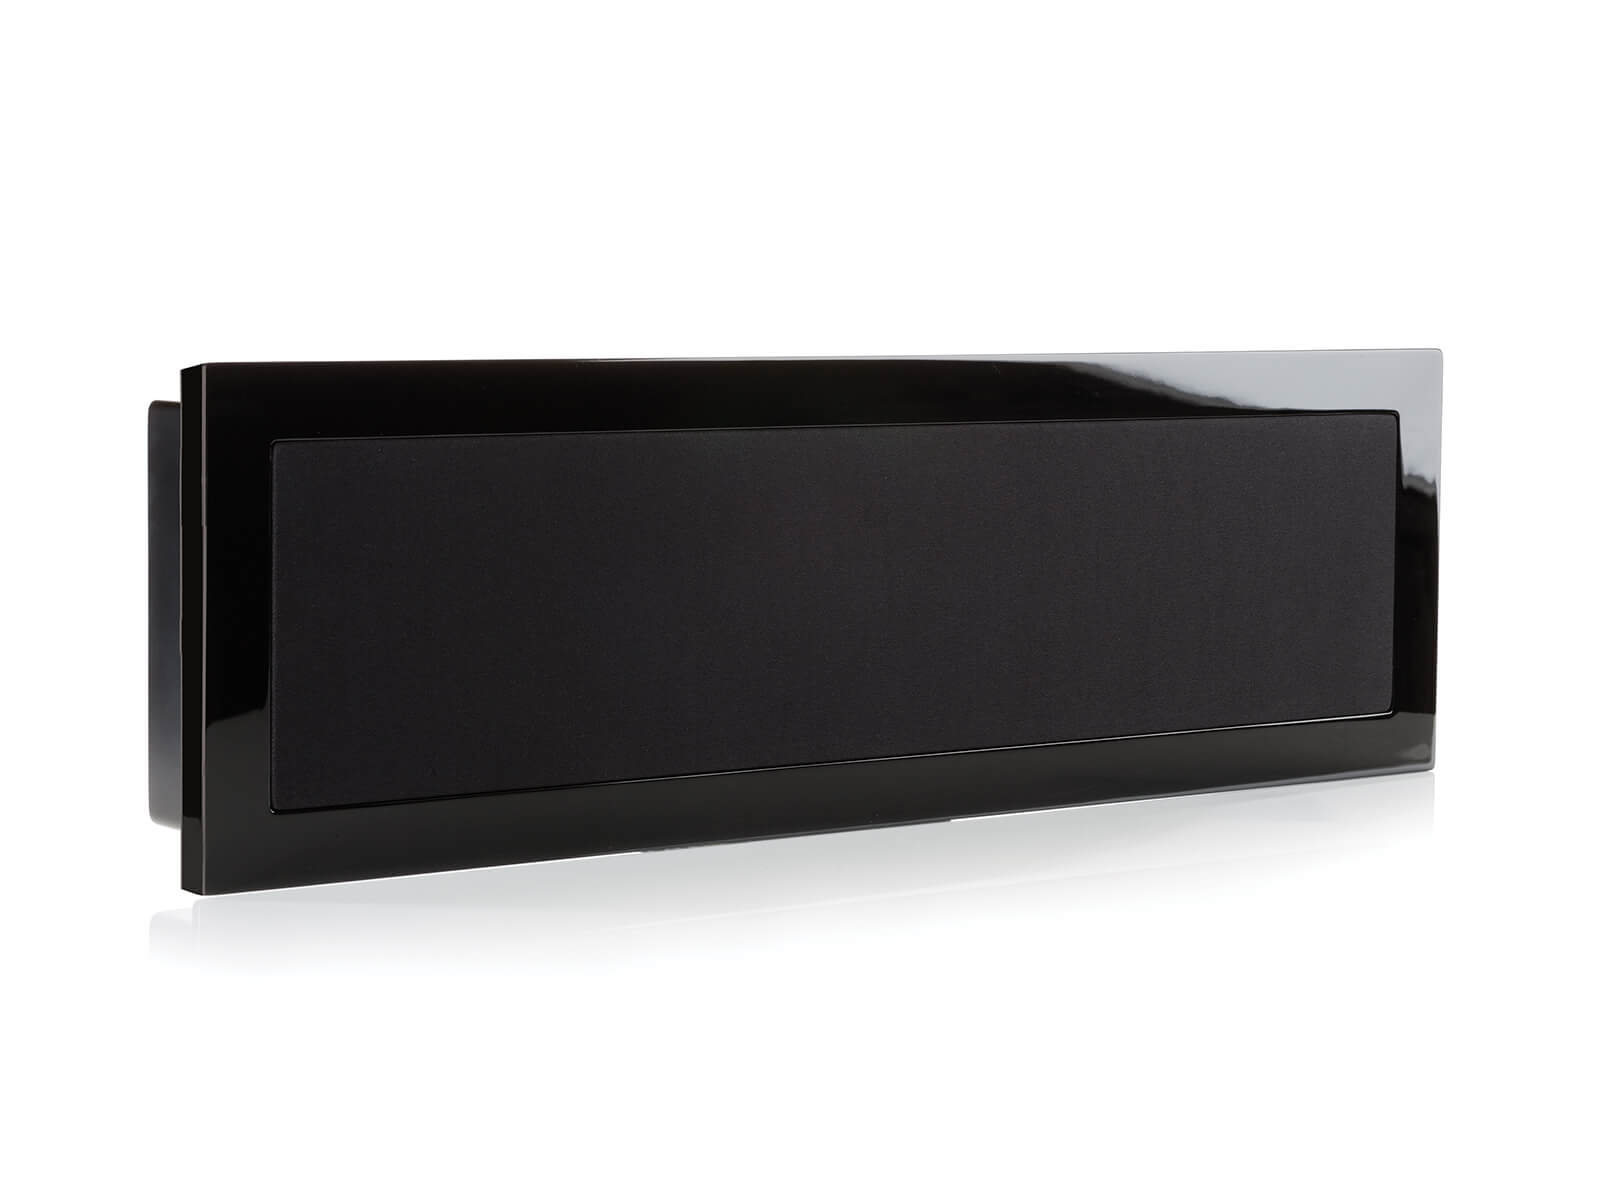 SoundFrame SF2, in-wall speakers, horizontal with a high gloss black lacquer finish.